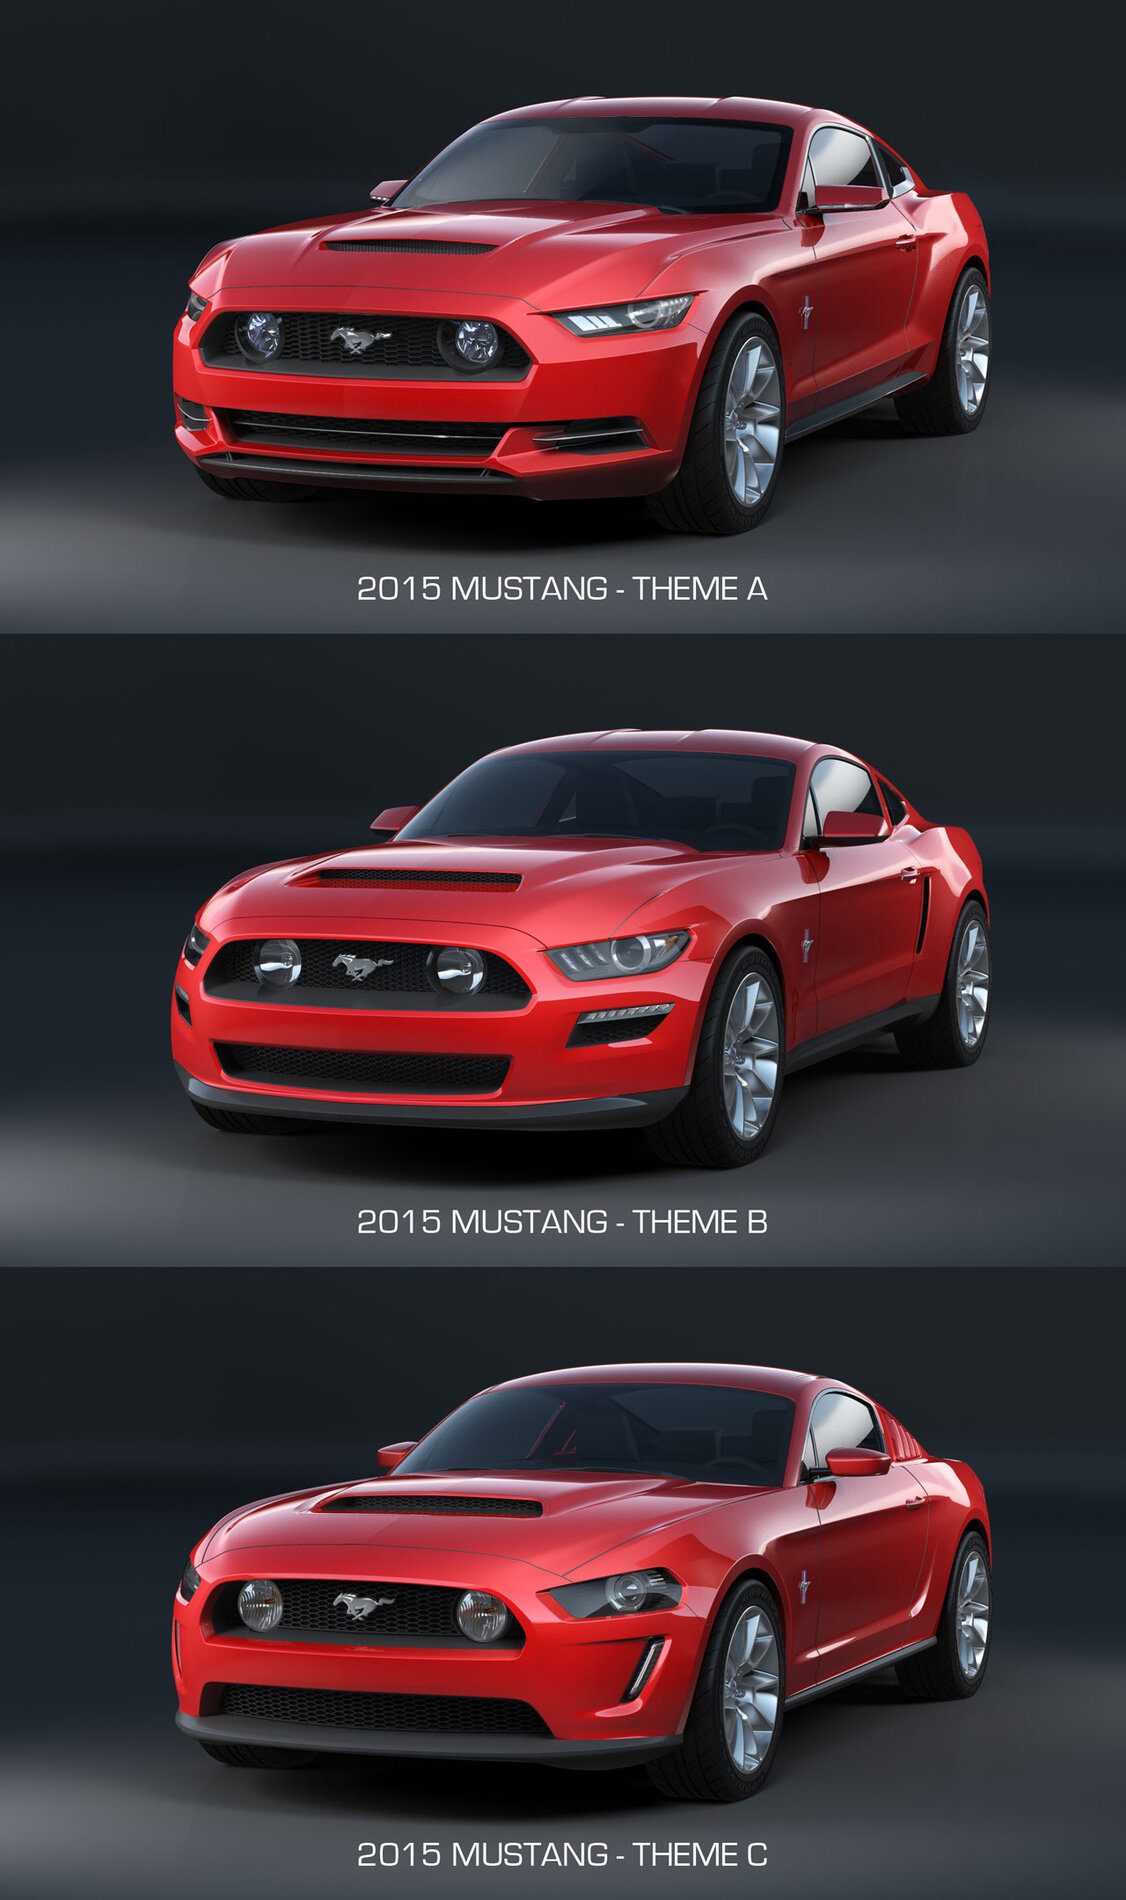 S650 Mustang S650 2023 Mustang (7th Gen) Lead Designer Revealed 04-2015-Ford-Mustang-Design-Theme-Comparison-Front-end (1)